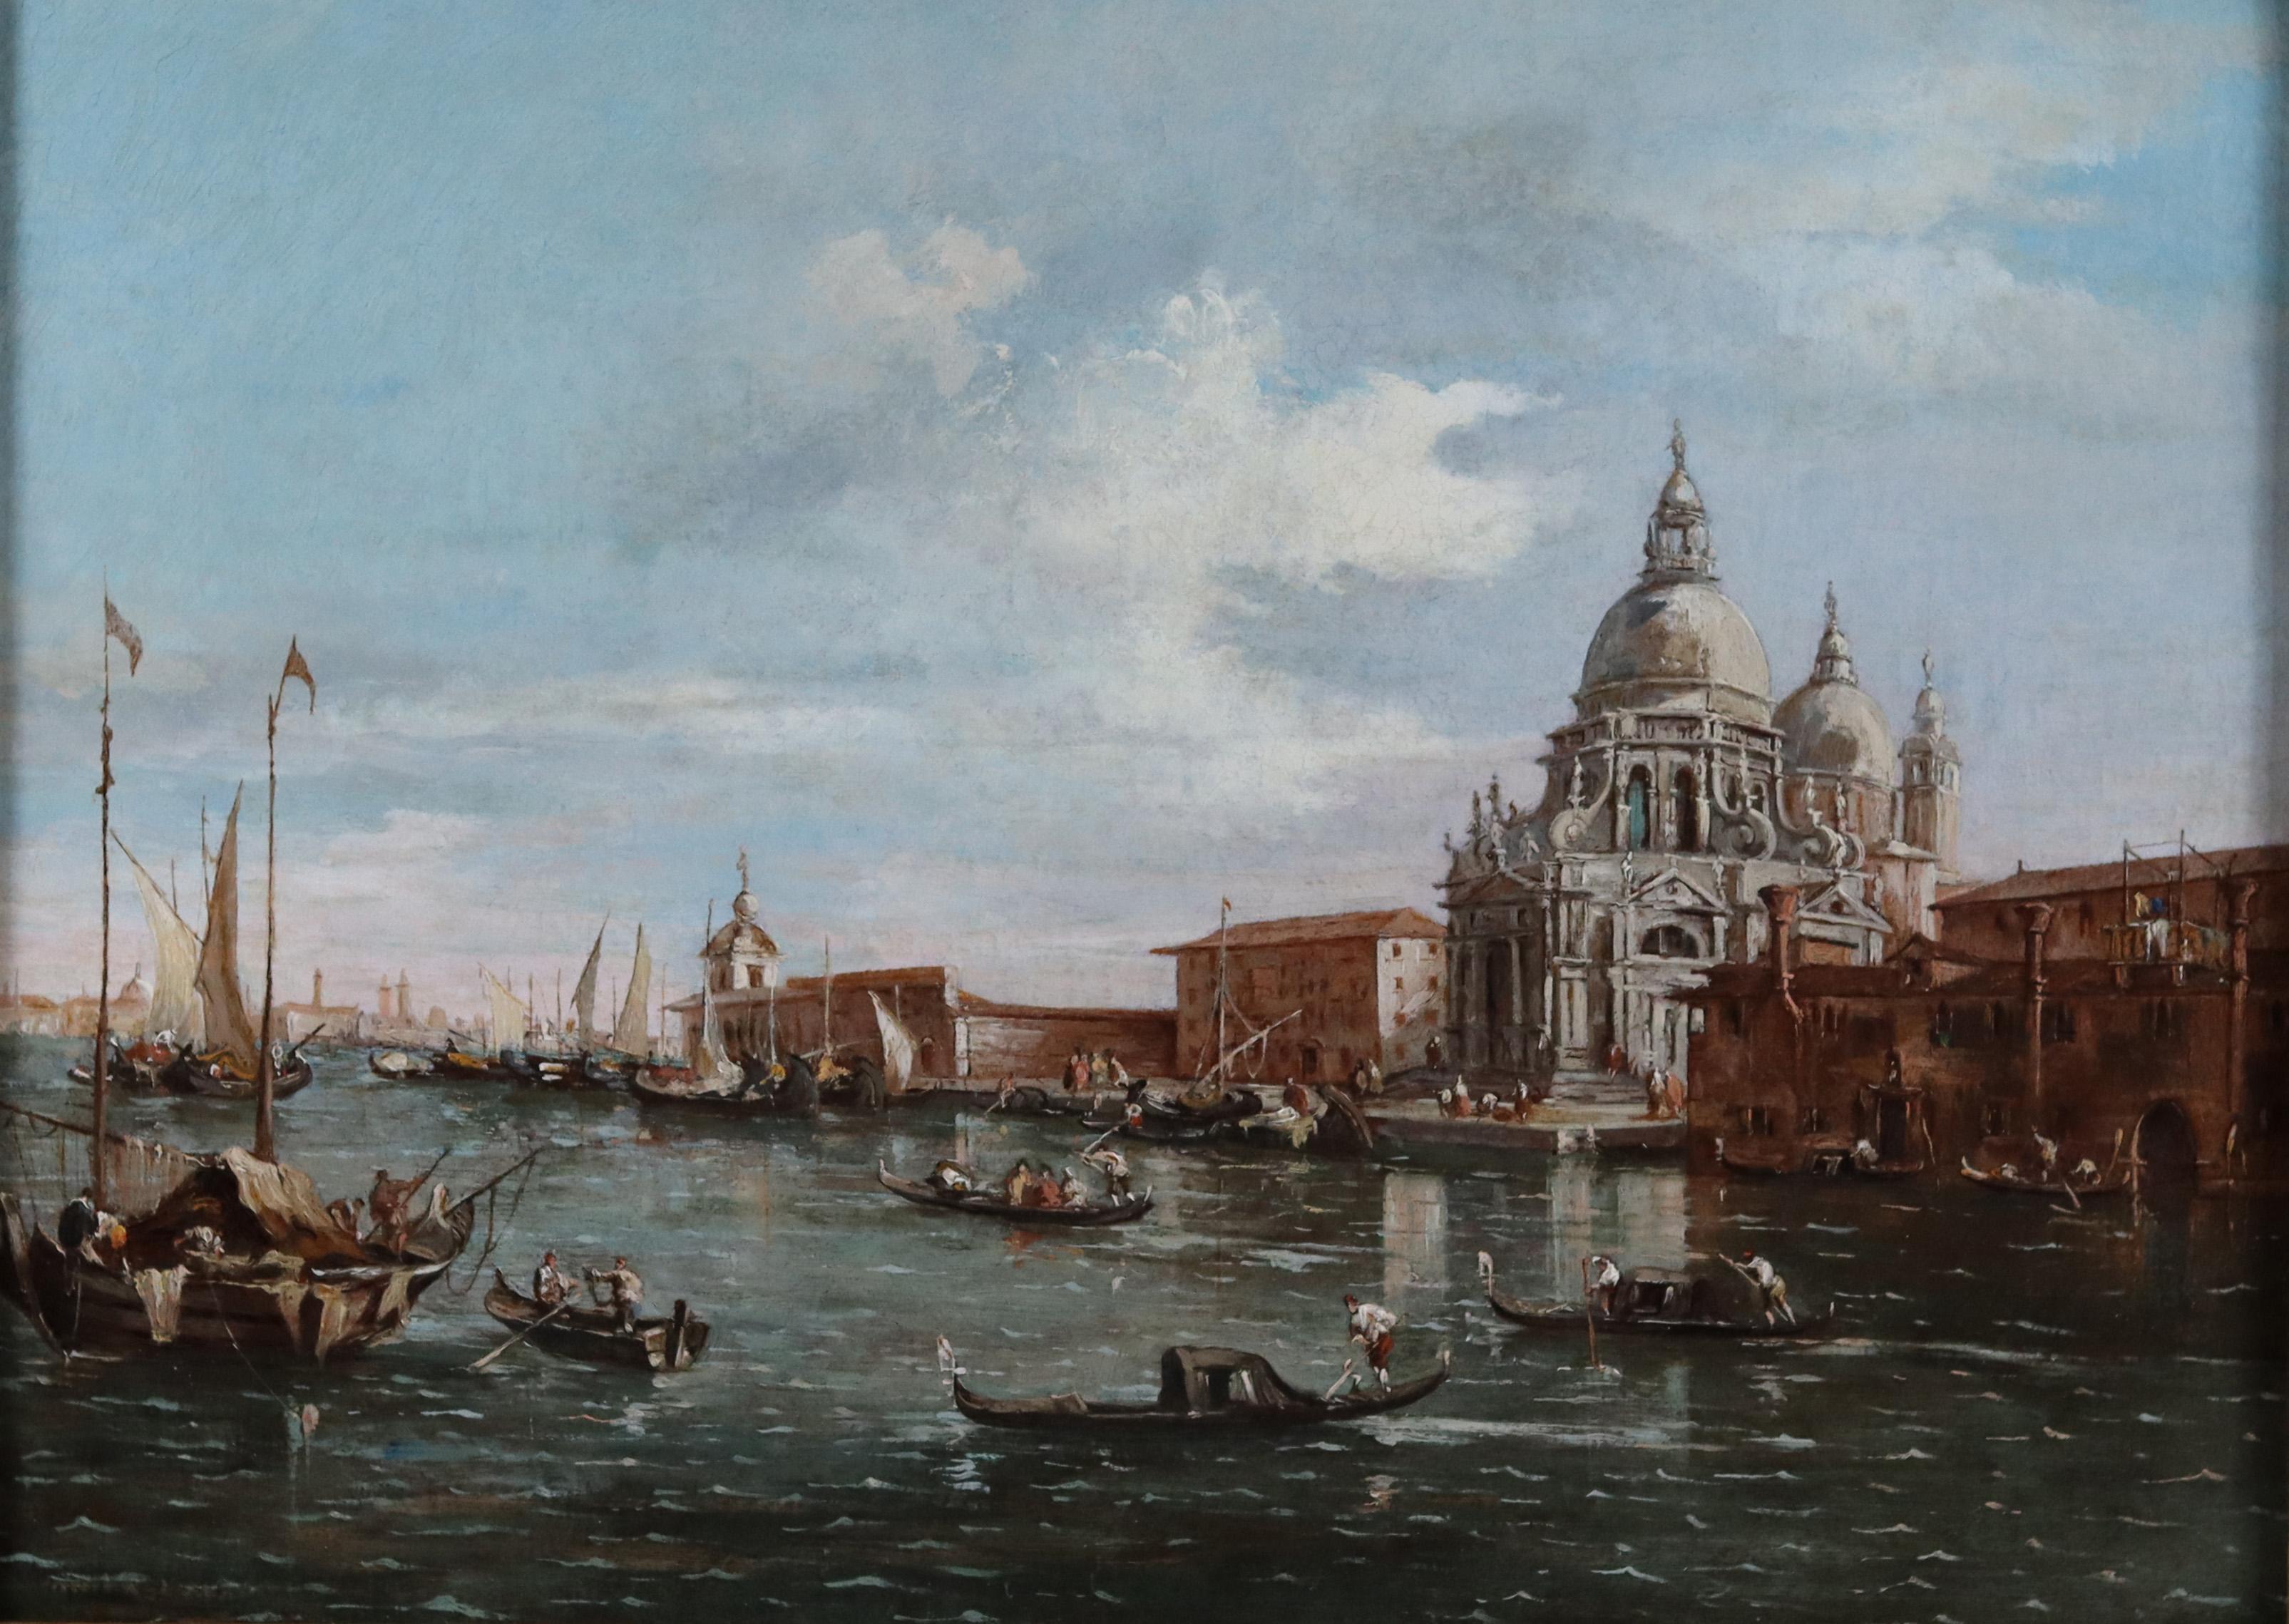 A Pair of 18th century Venetian Canal Scenes in the Style of Francesco Guardi   For Sale 1